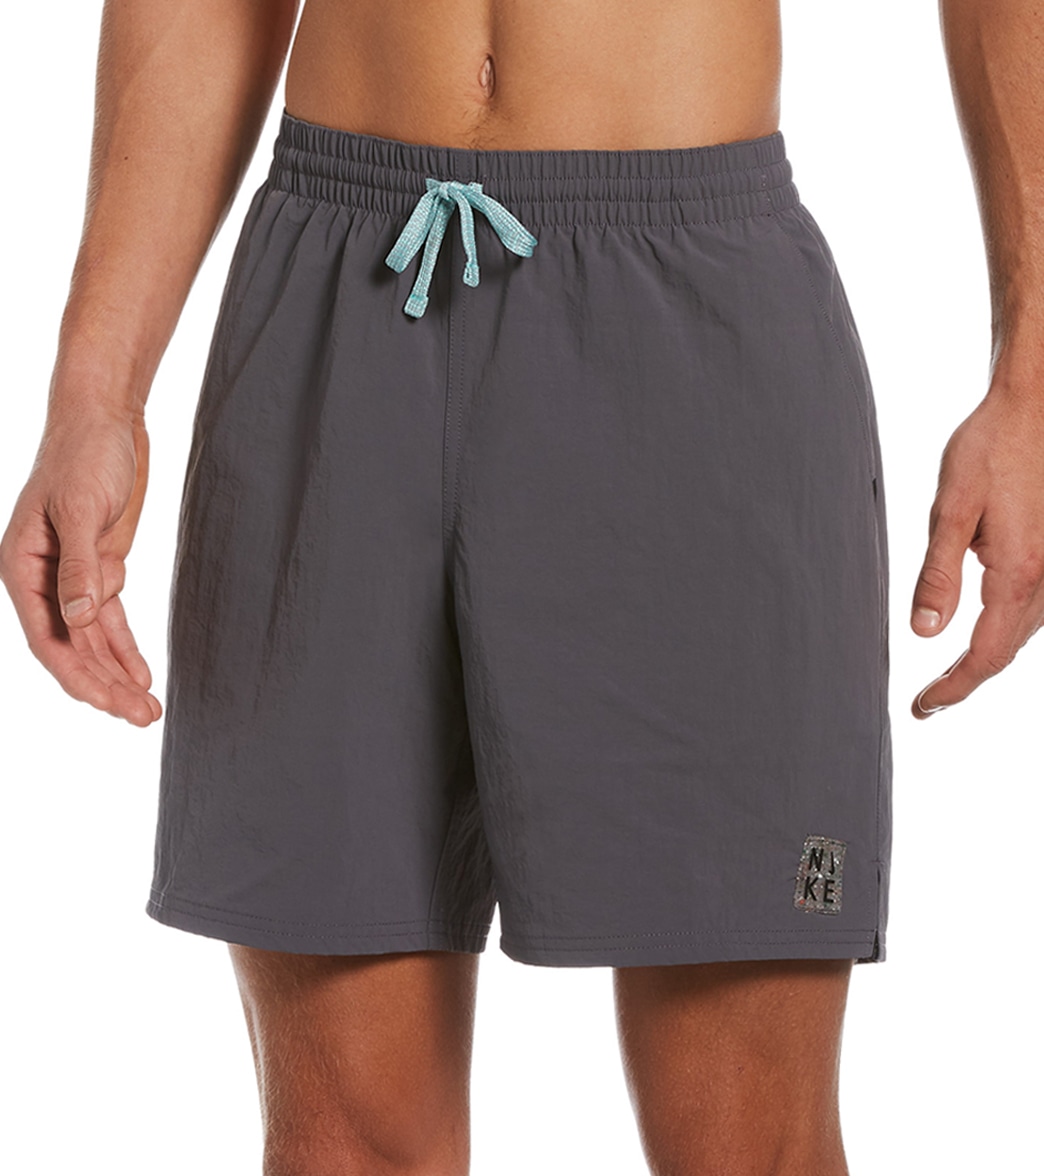 Nike Men's Solid Icon 5 Volley Swim Trunk - Iron Grey Large - Swimoutlet.com